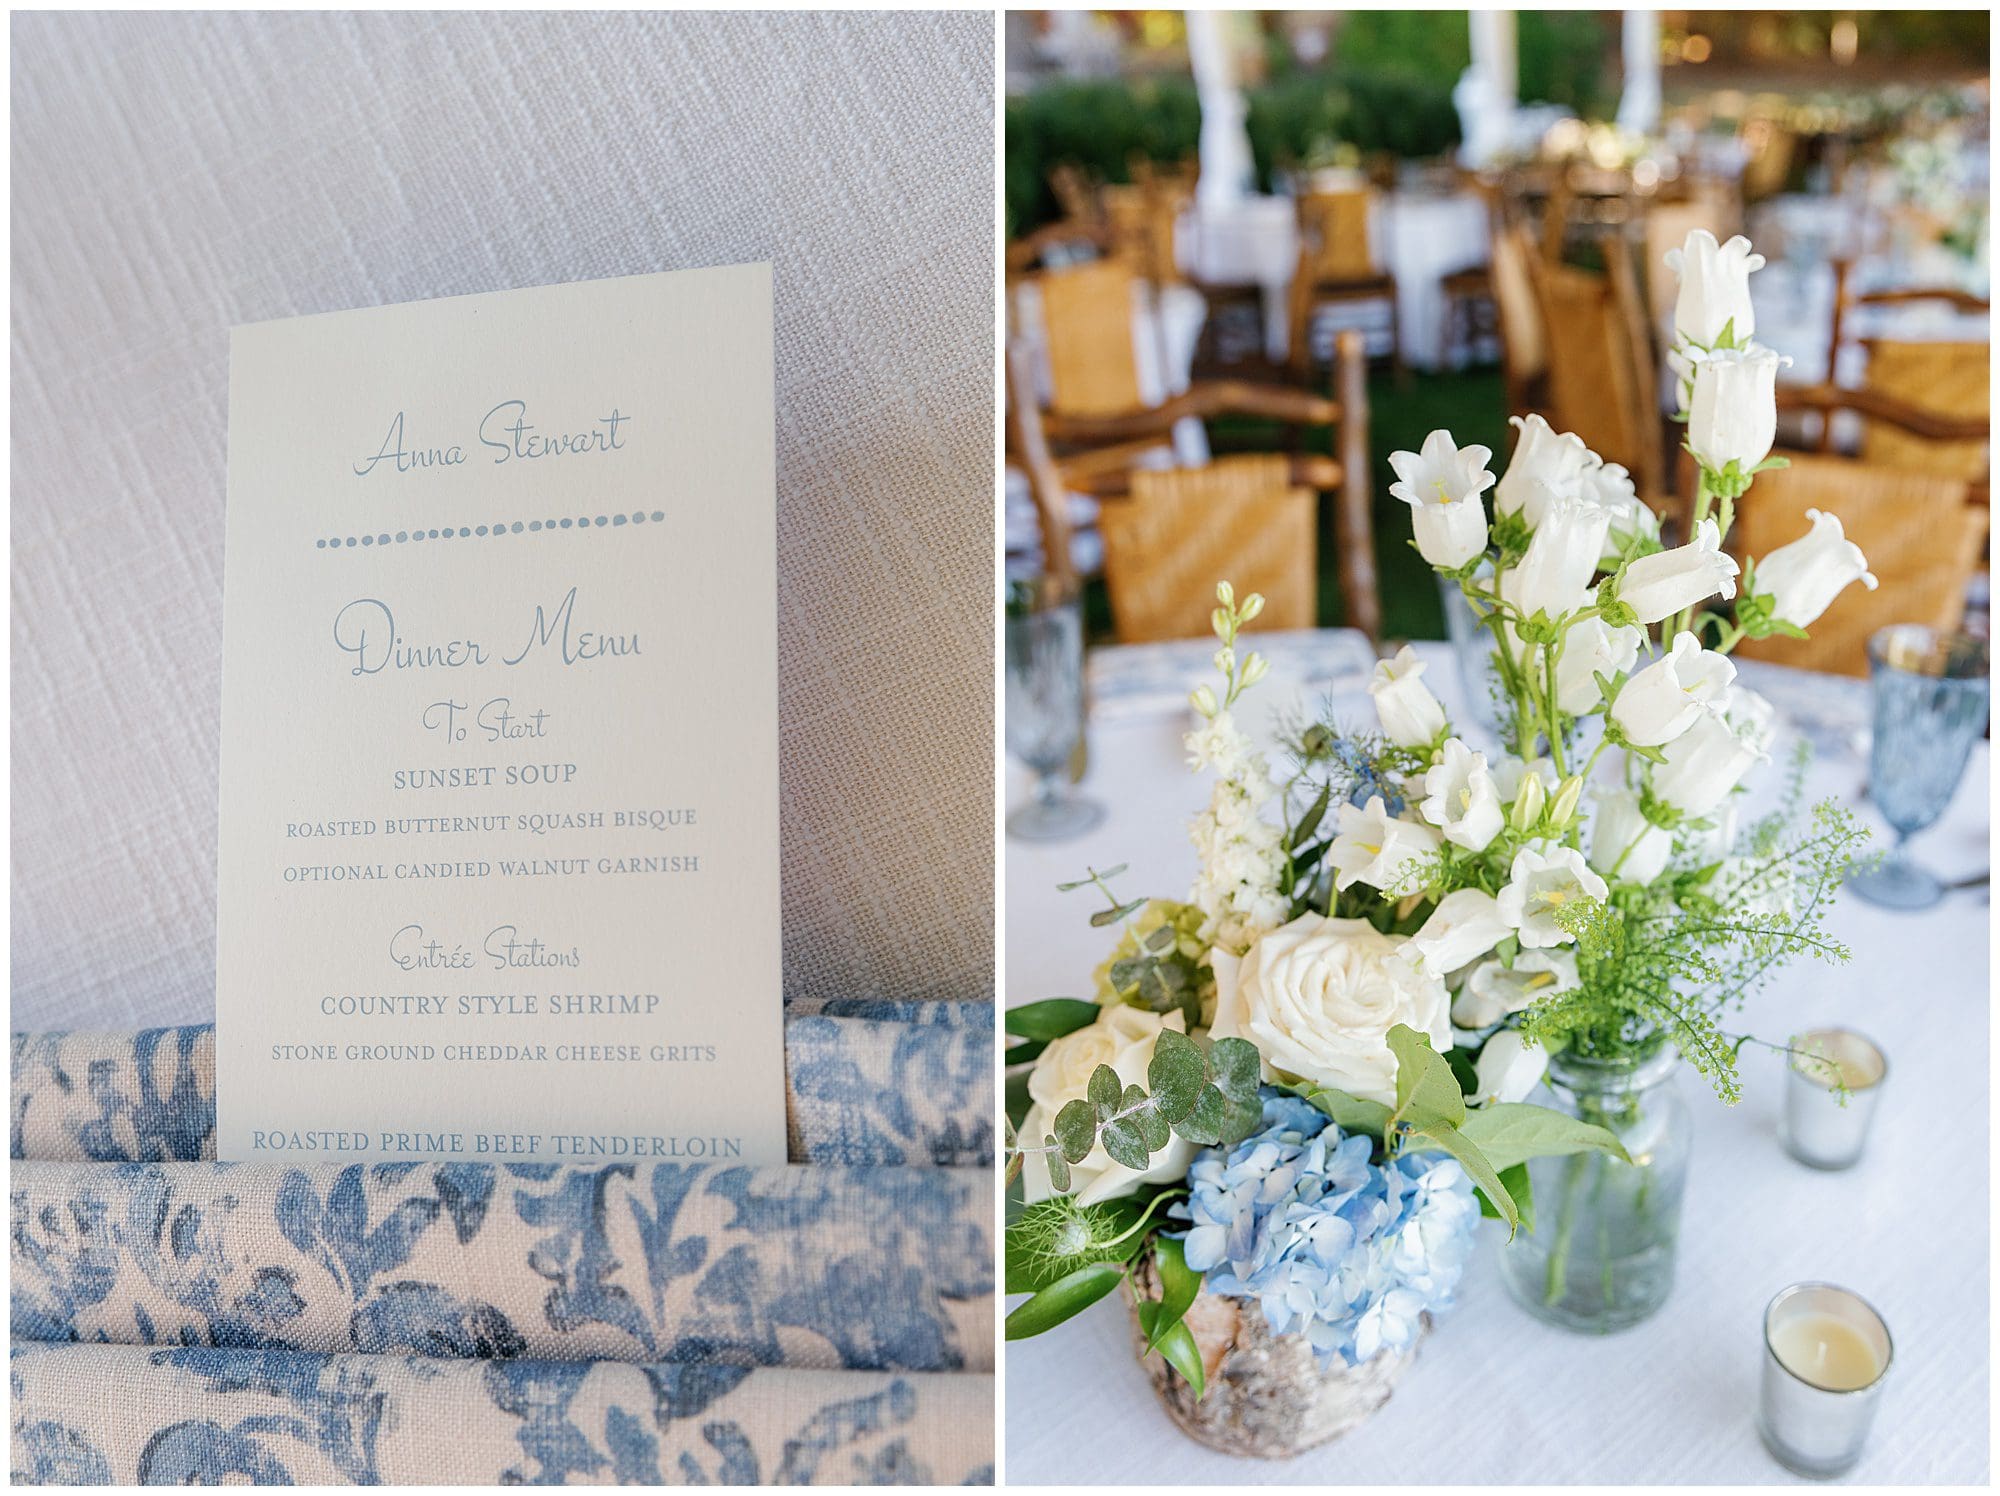 A table setting with blue and white flowers.